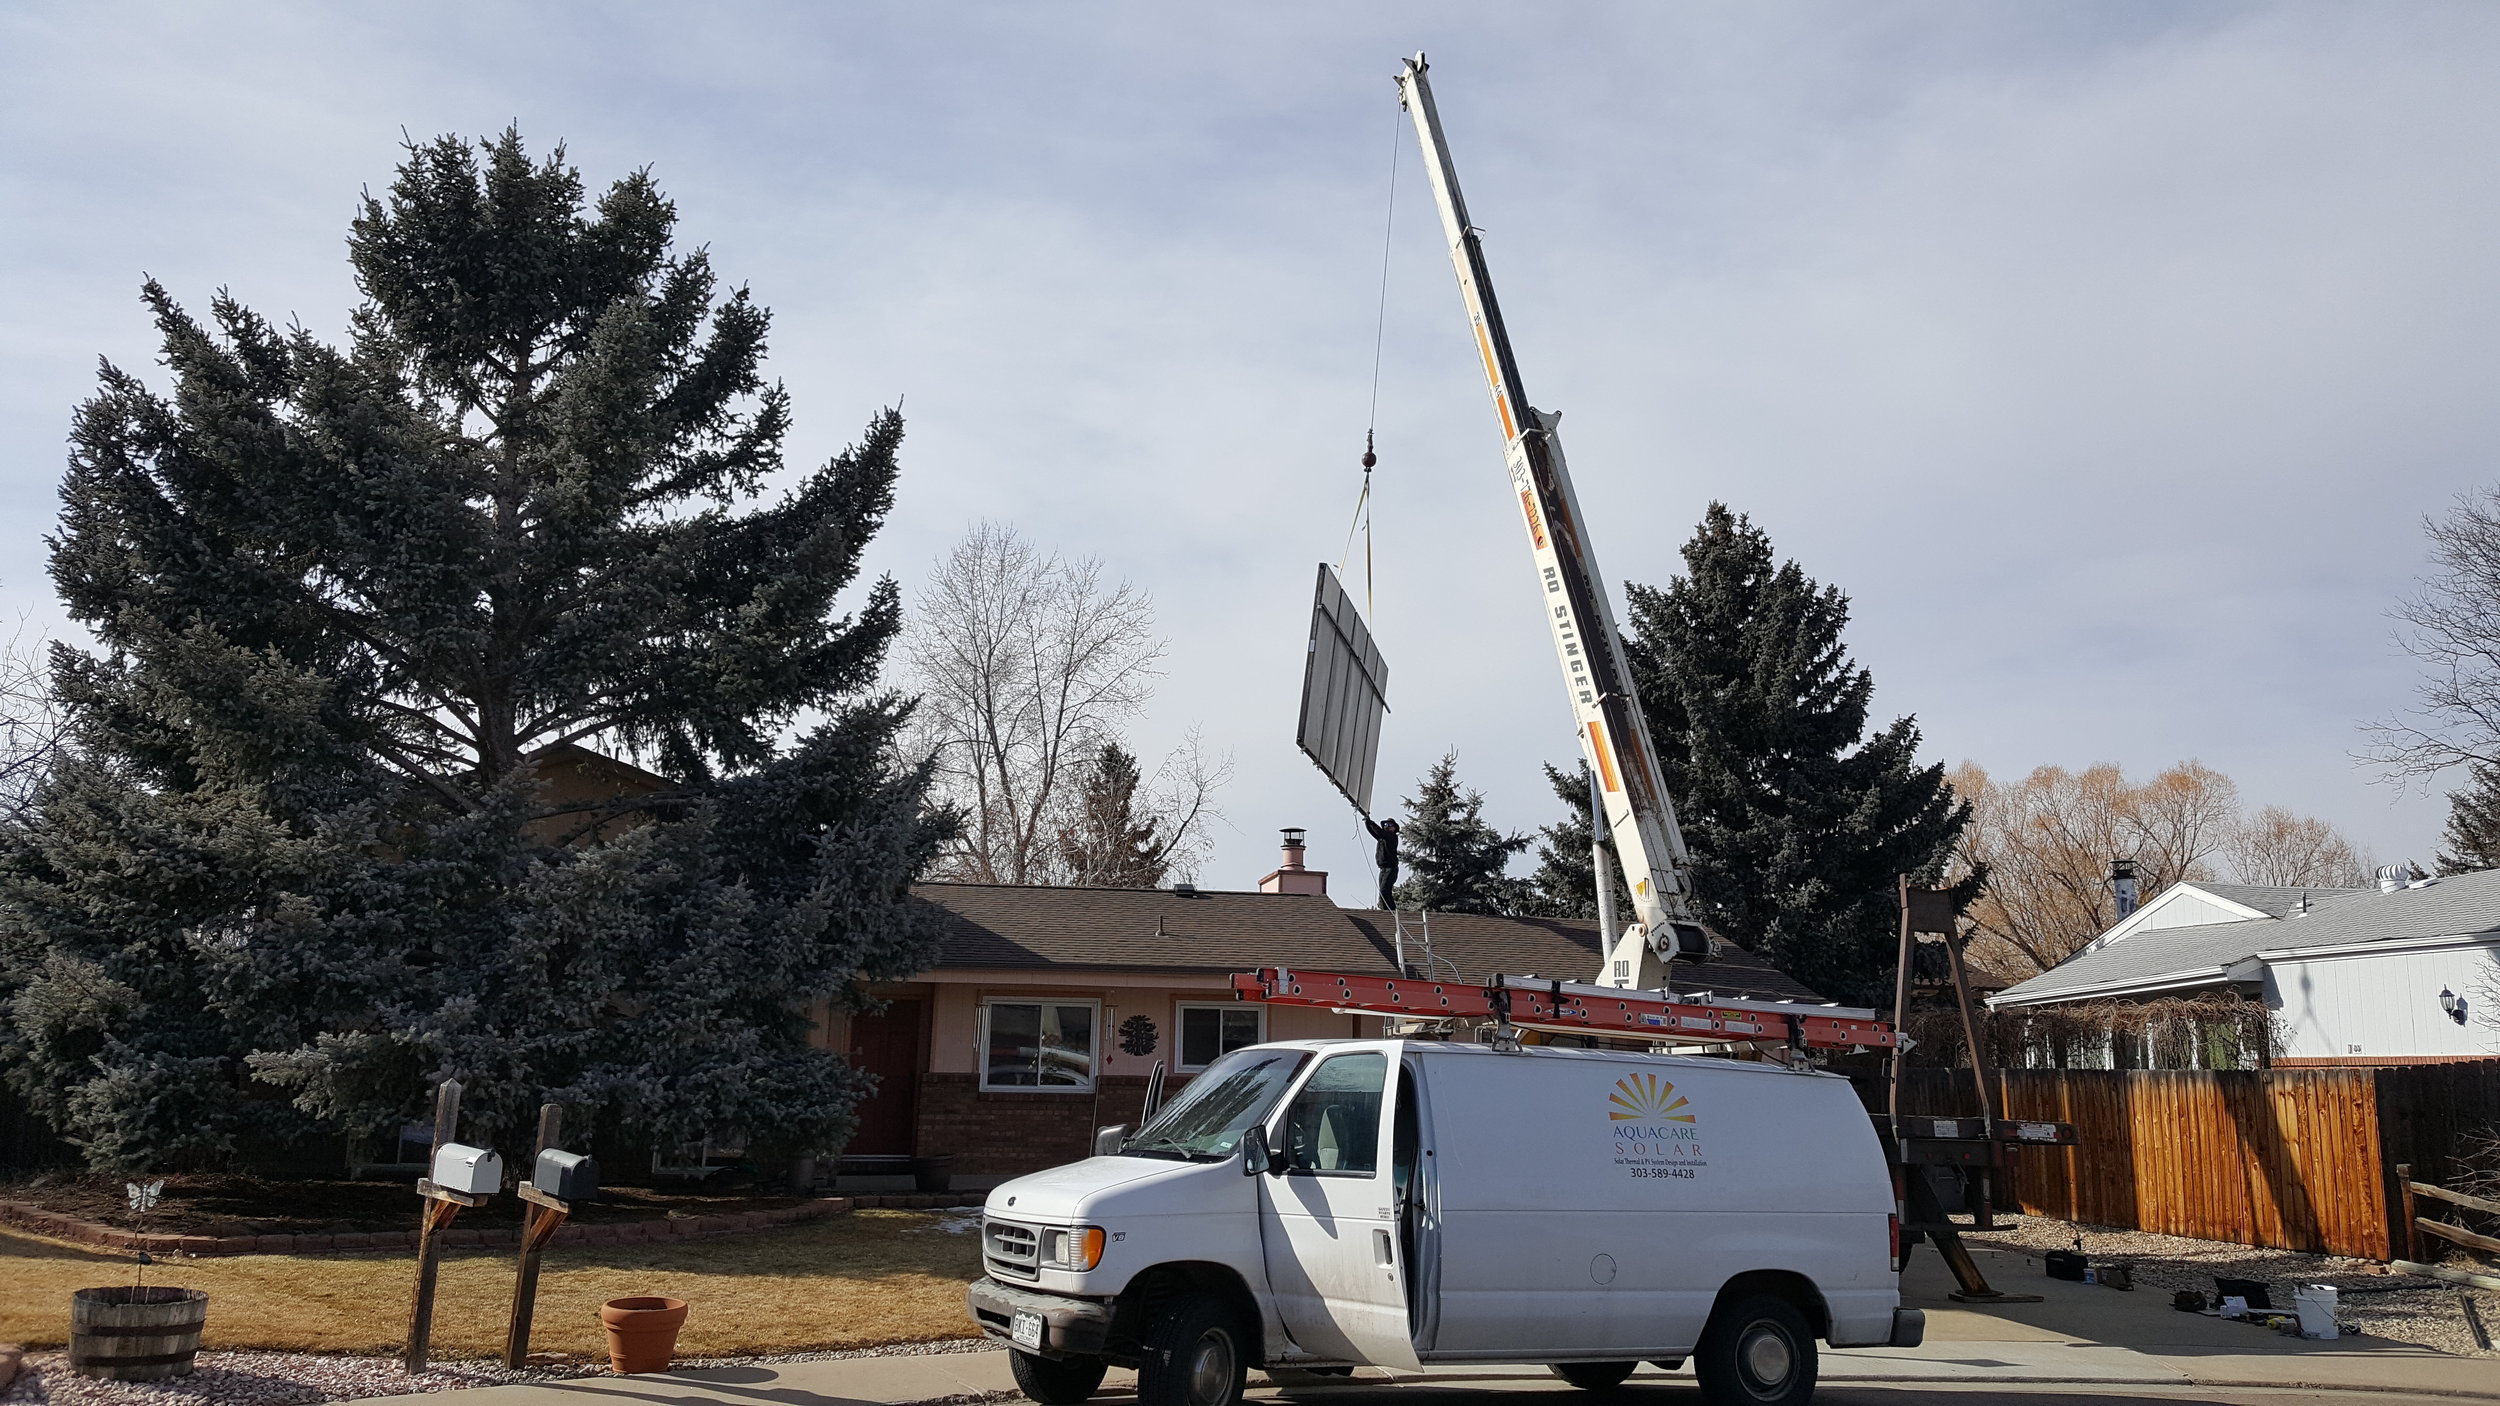 Flying the solar thermal system to be mounted in Longmont, Colorado